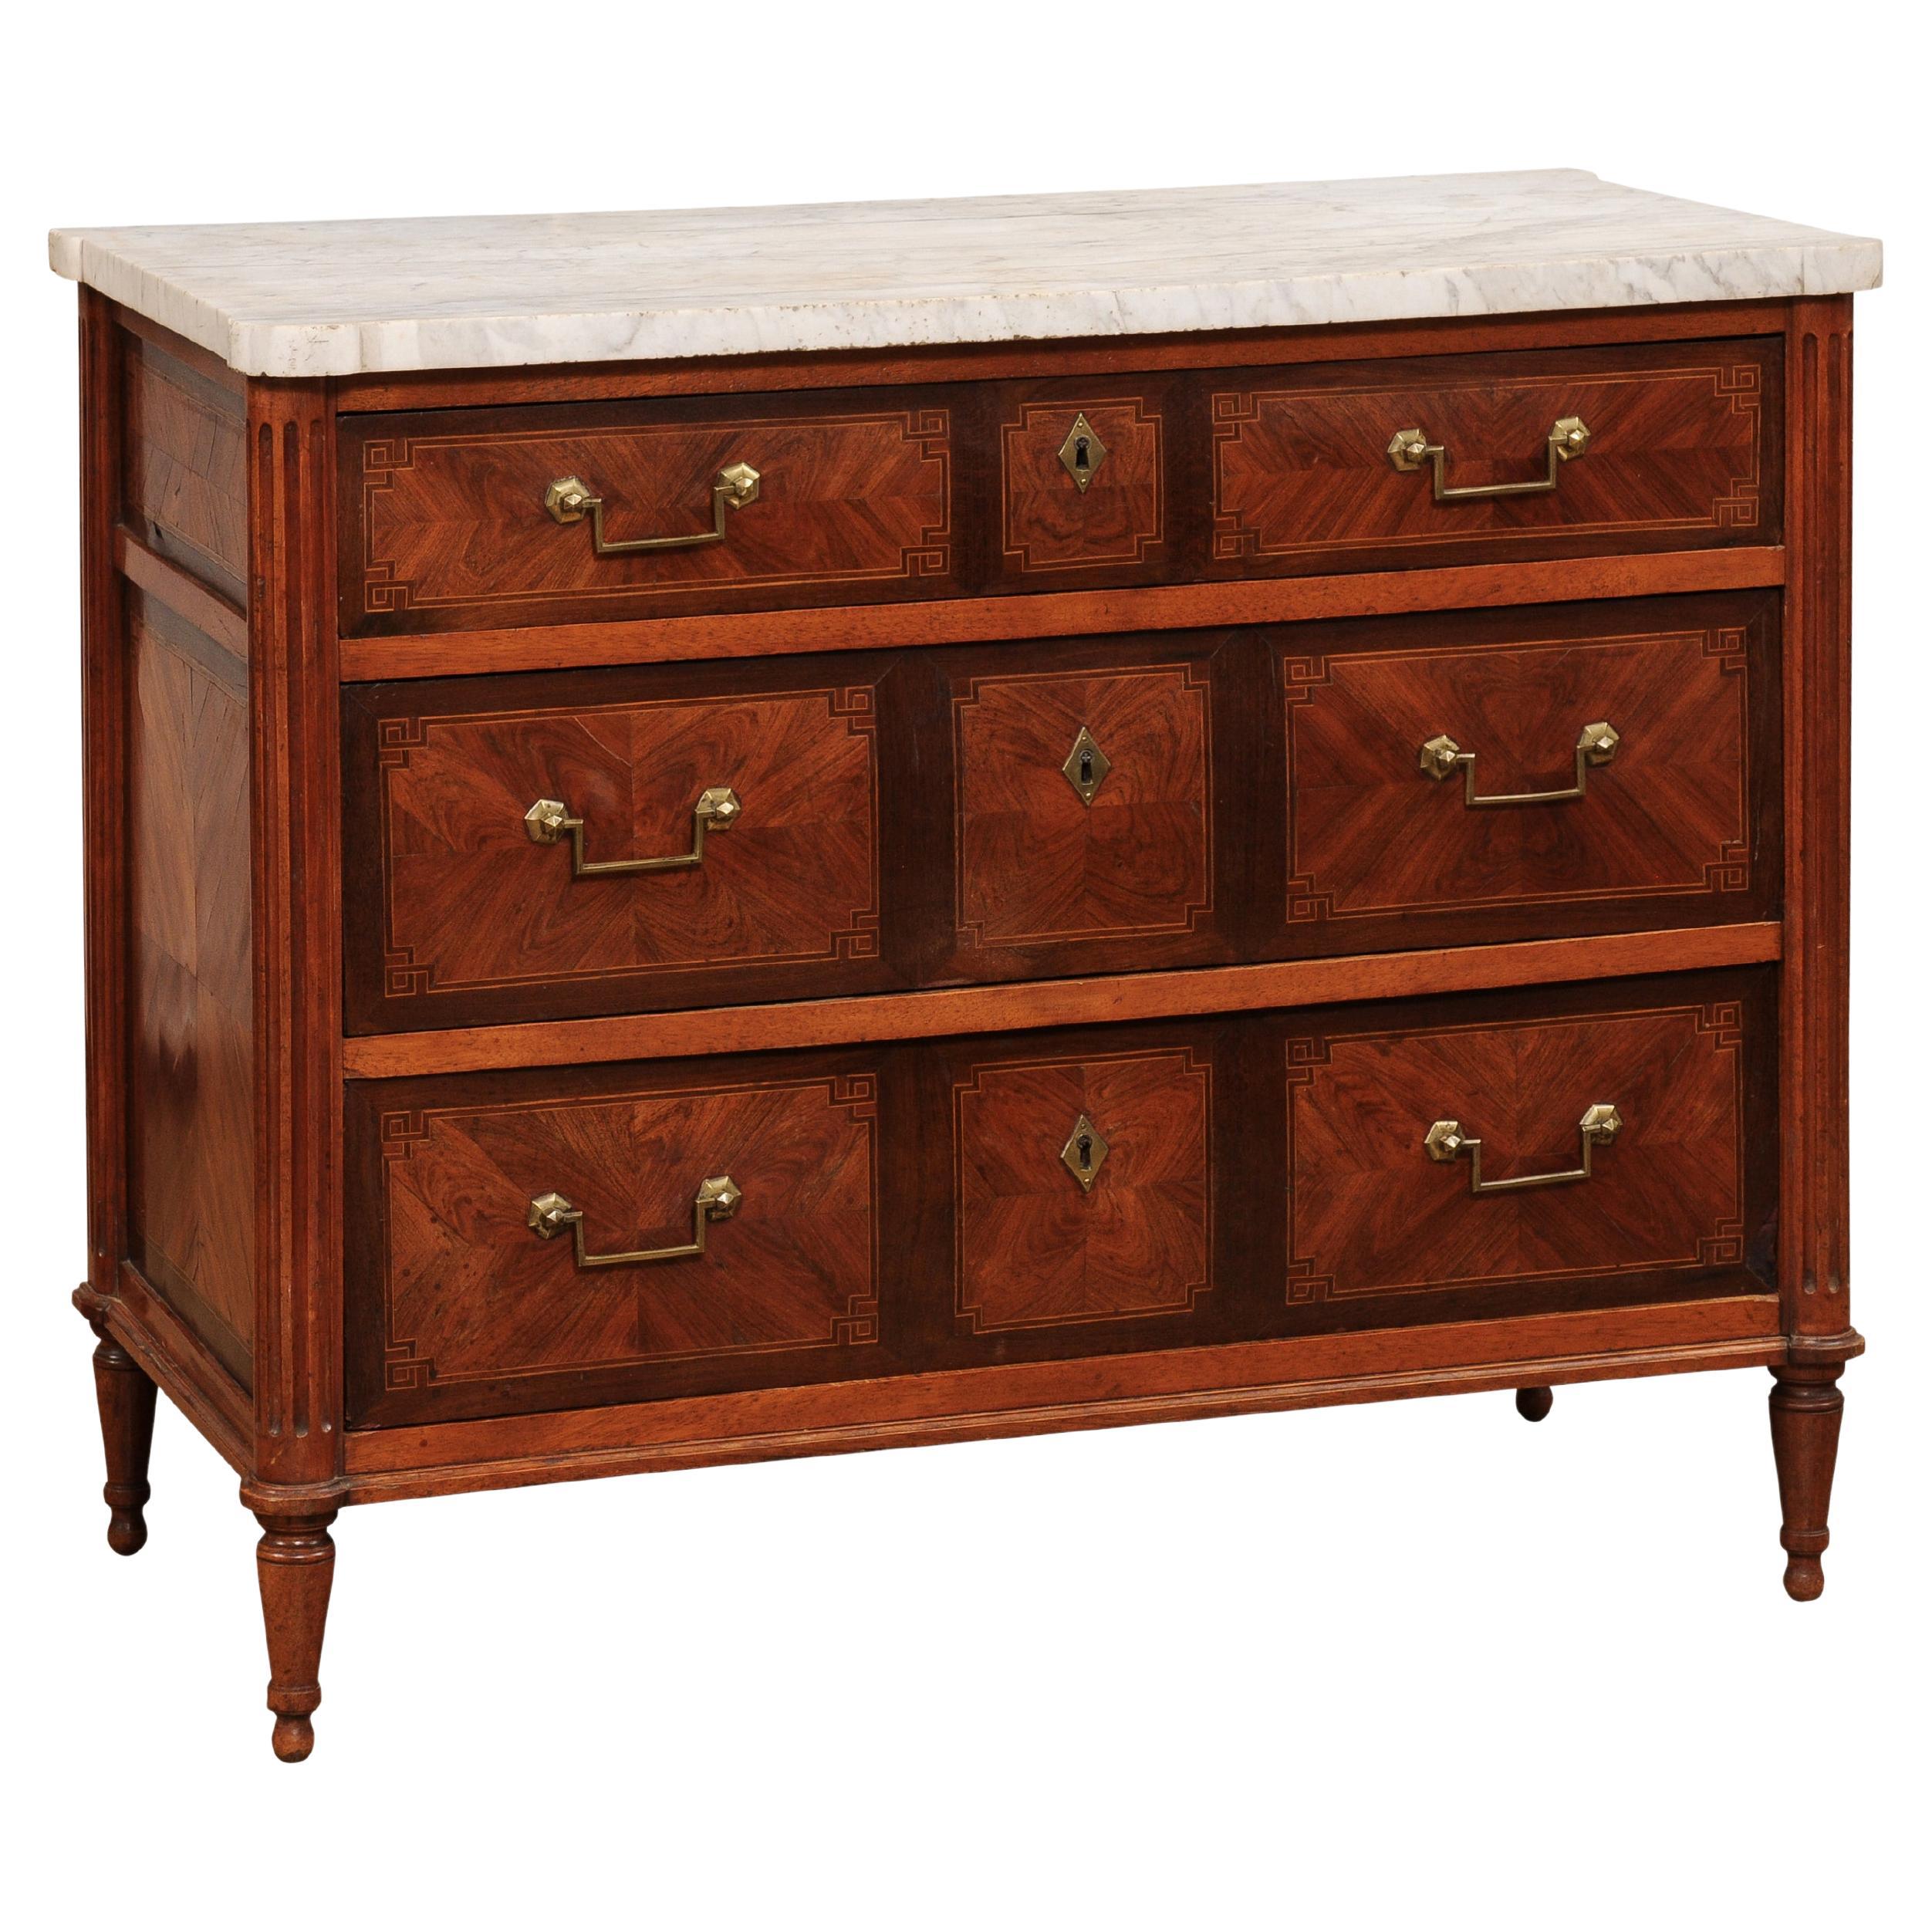 French 18th Century Mahogany and Rosewood Three Drawer Commode with Marble Top